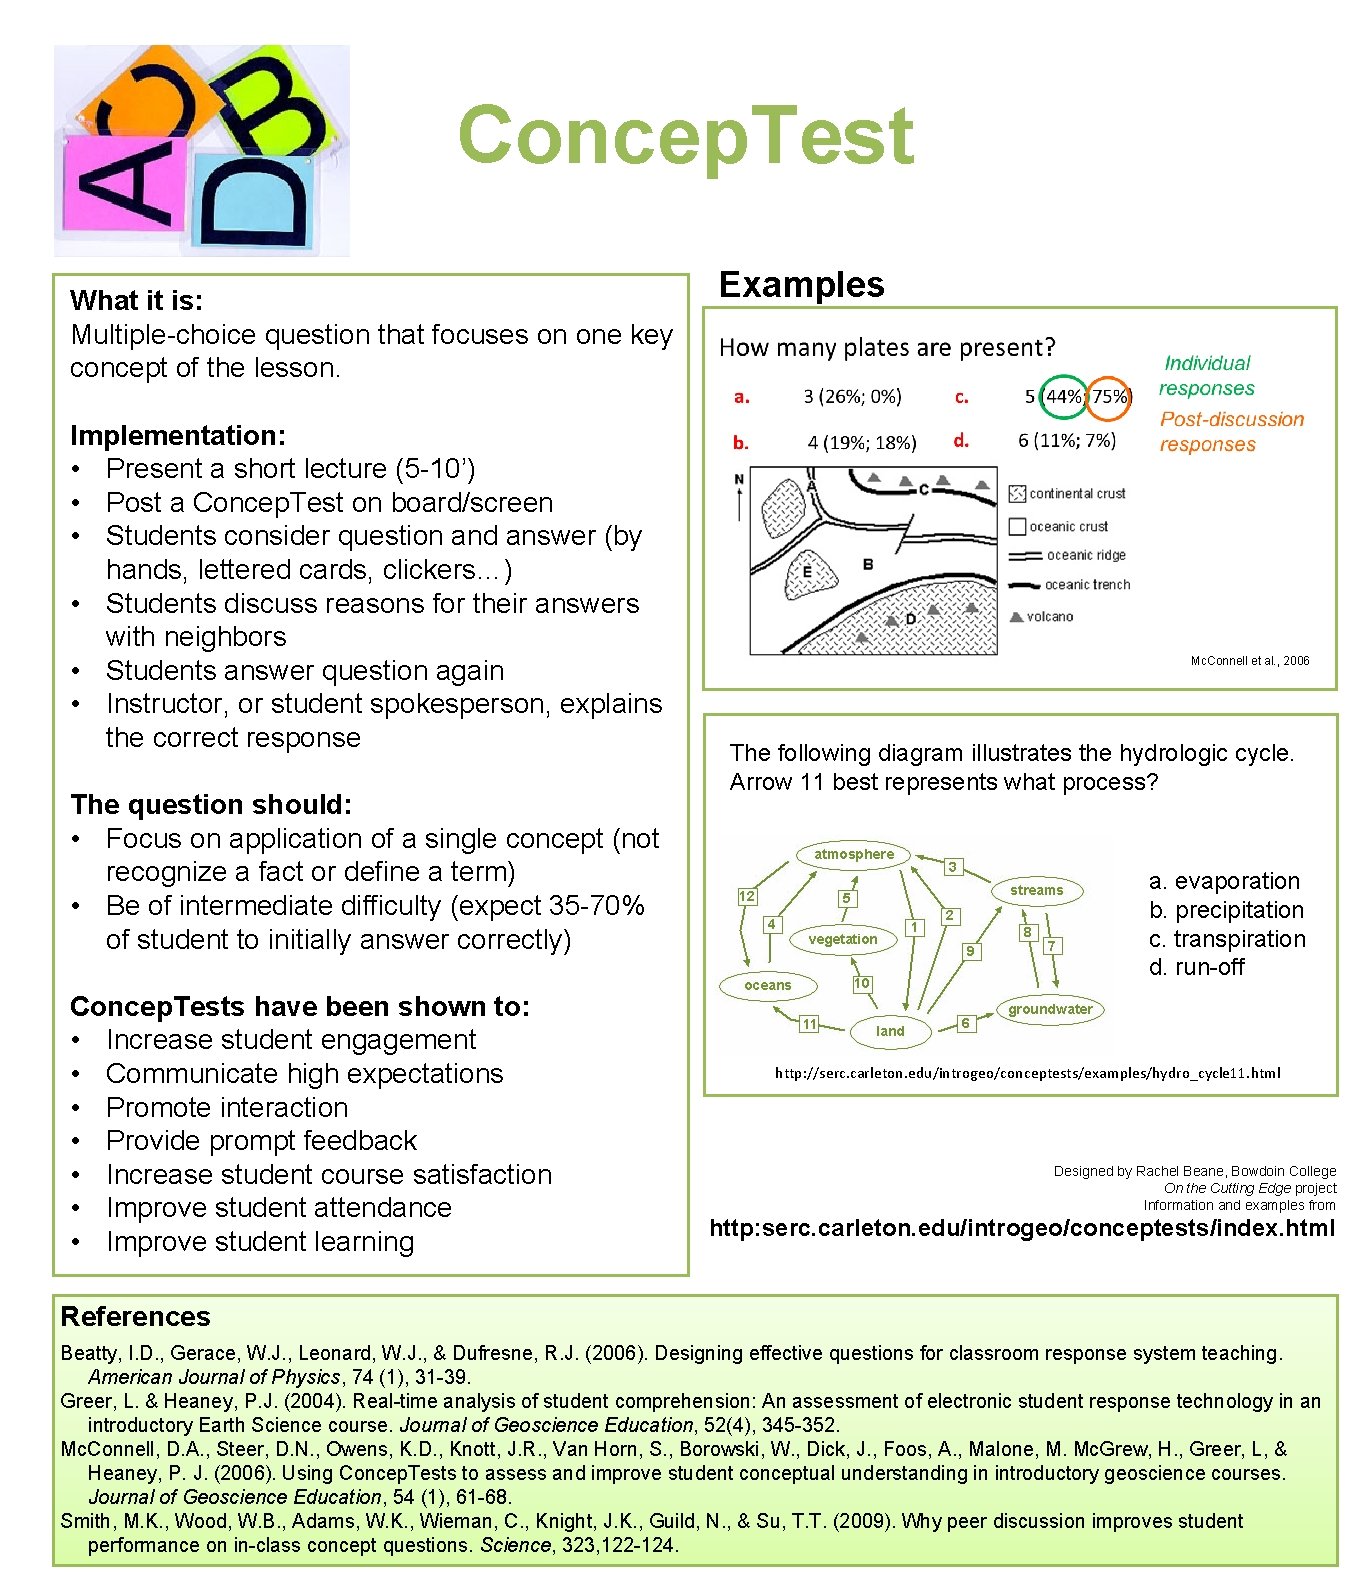 Concep. Test What it is: Multiple-choice question that focuses on one key concept of